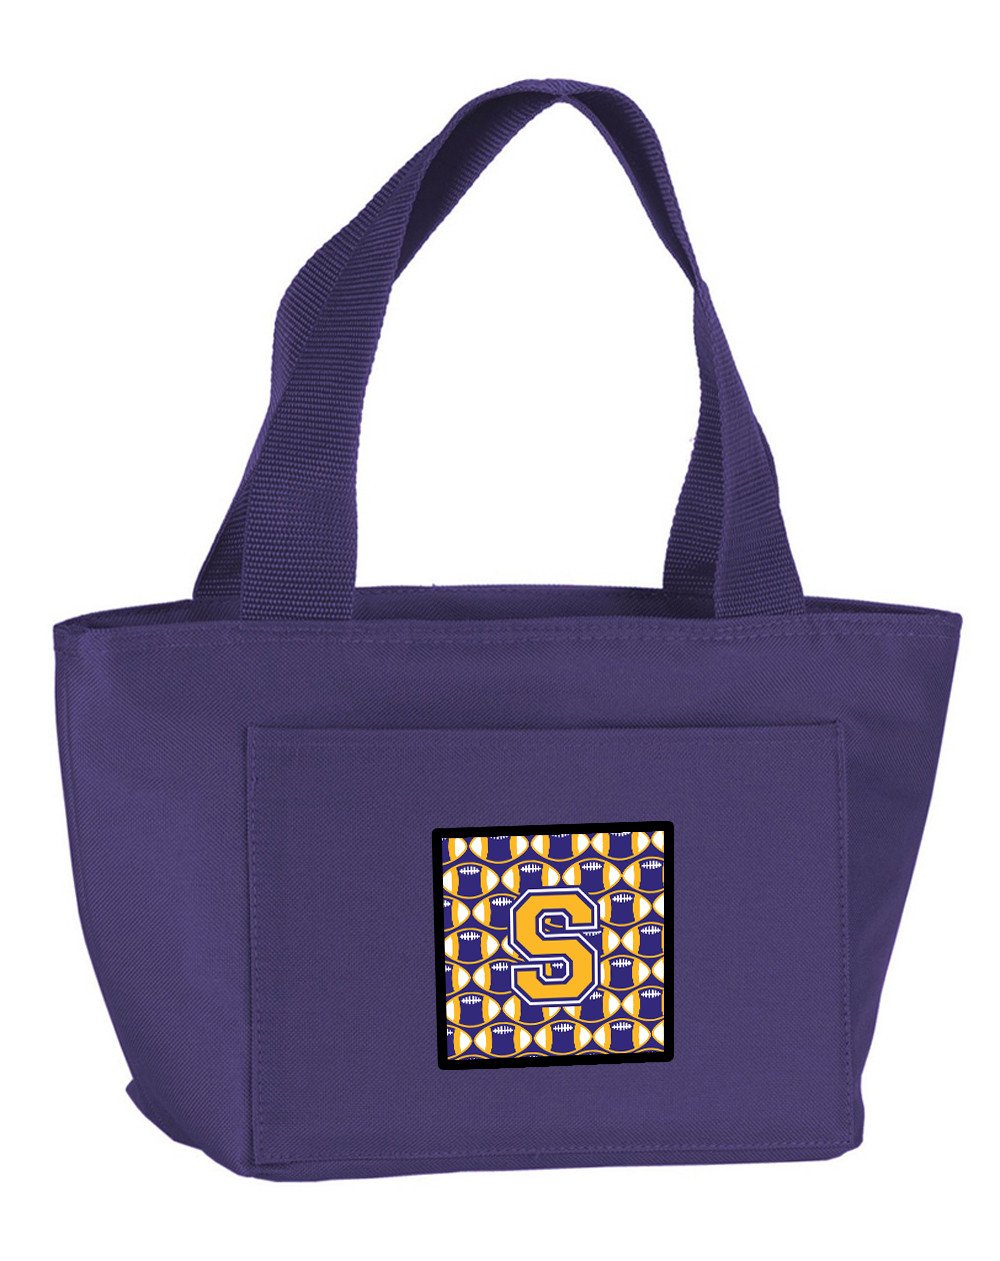 Letter S Football Purple and Gold Lunch Bag CJ1064-SPR-8808 by Caroline's Treasures